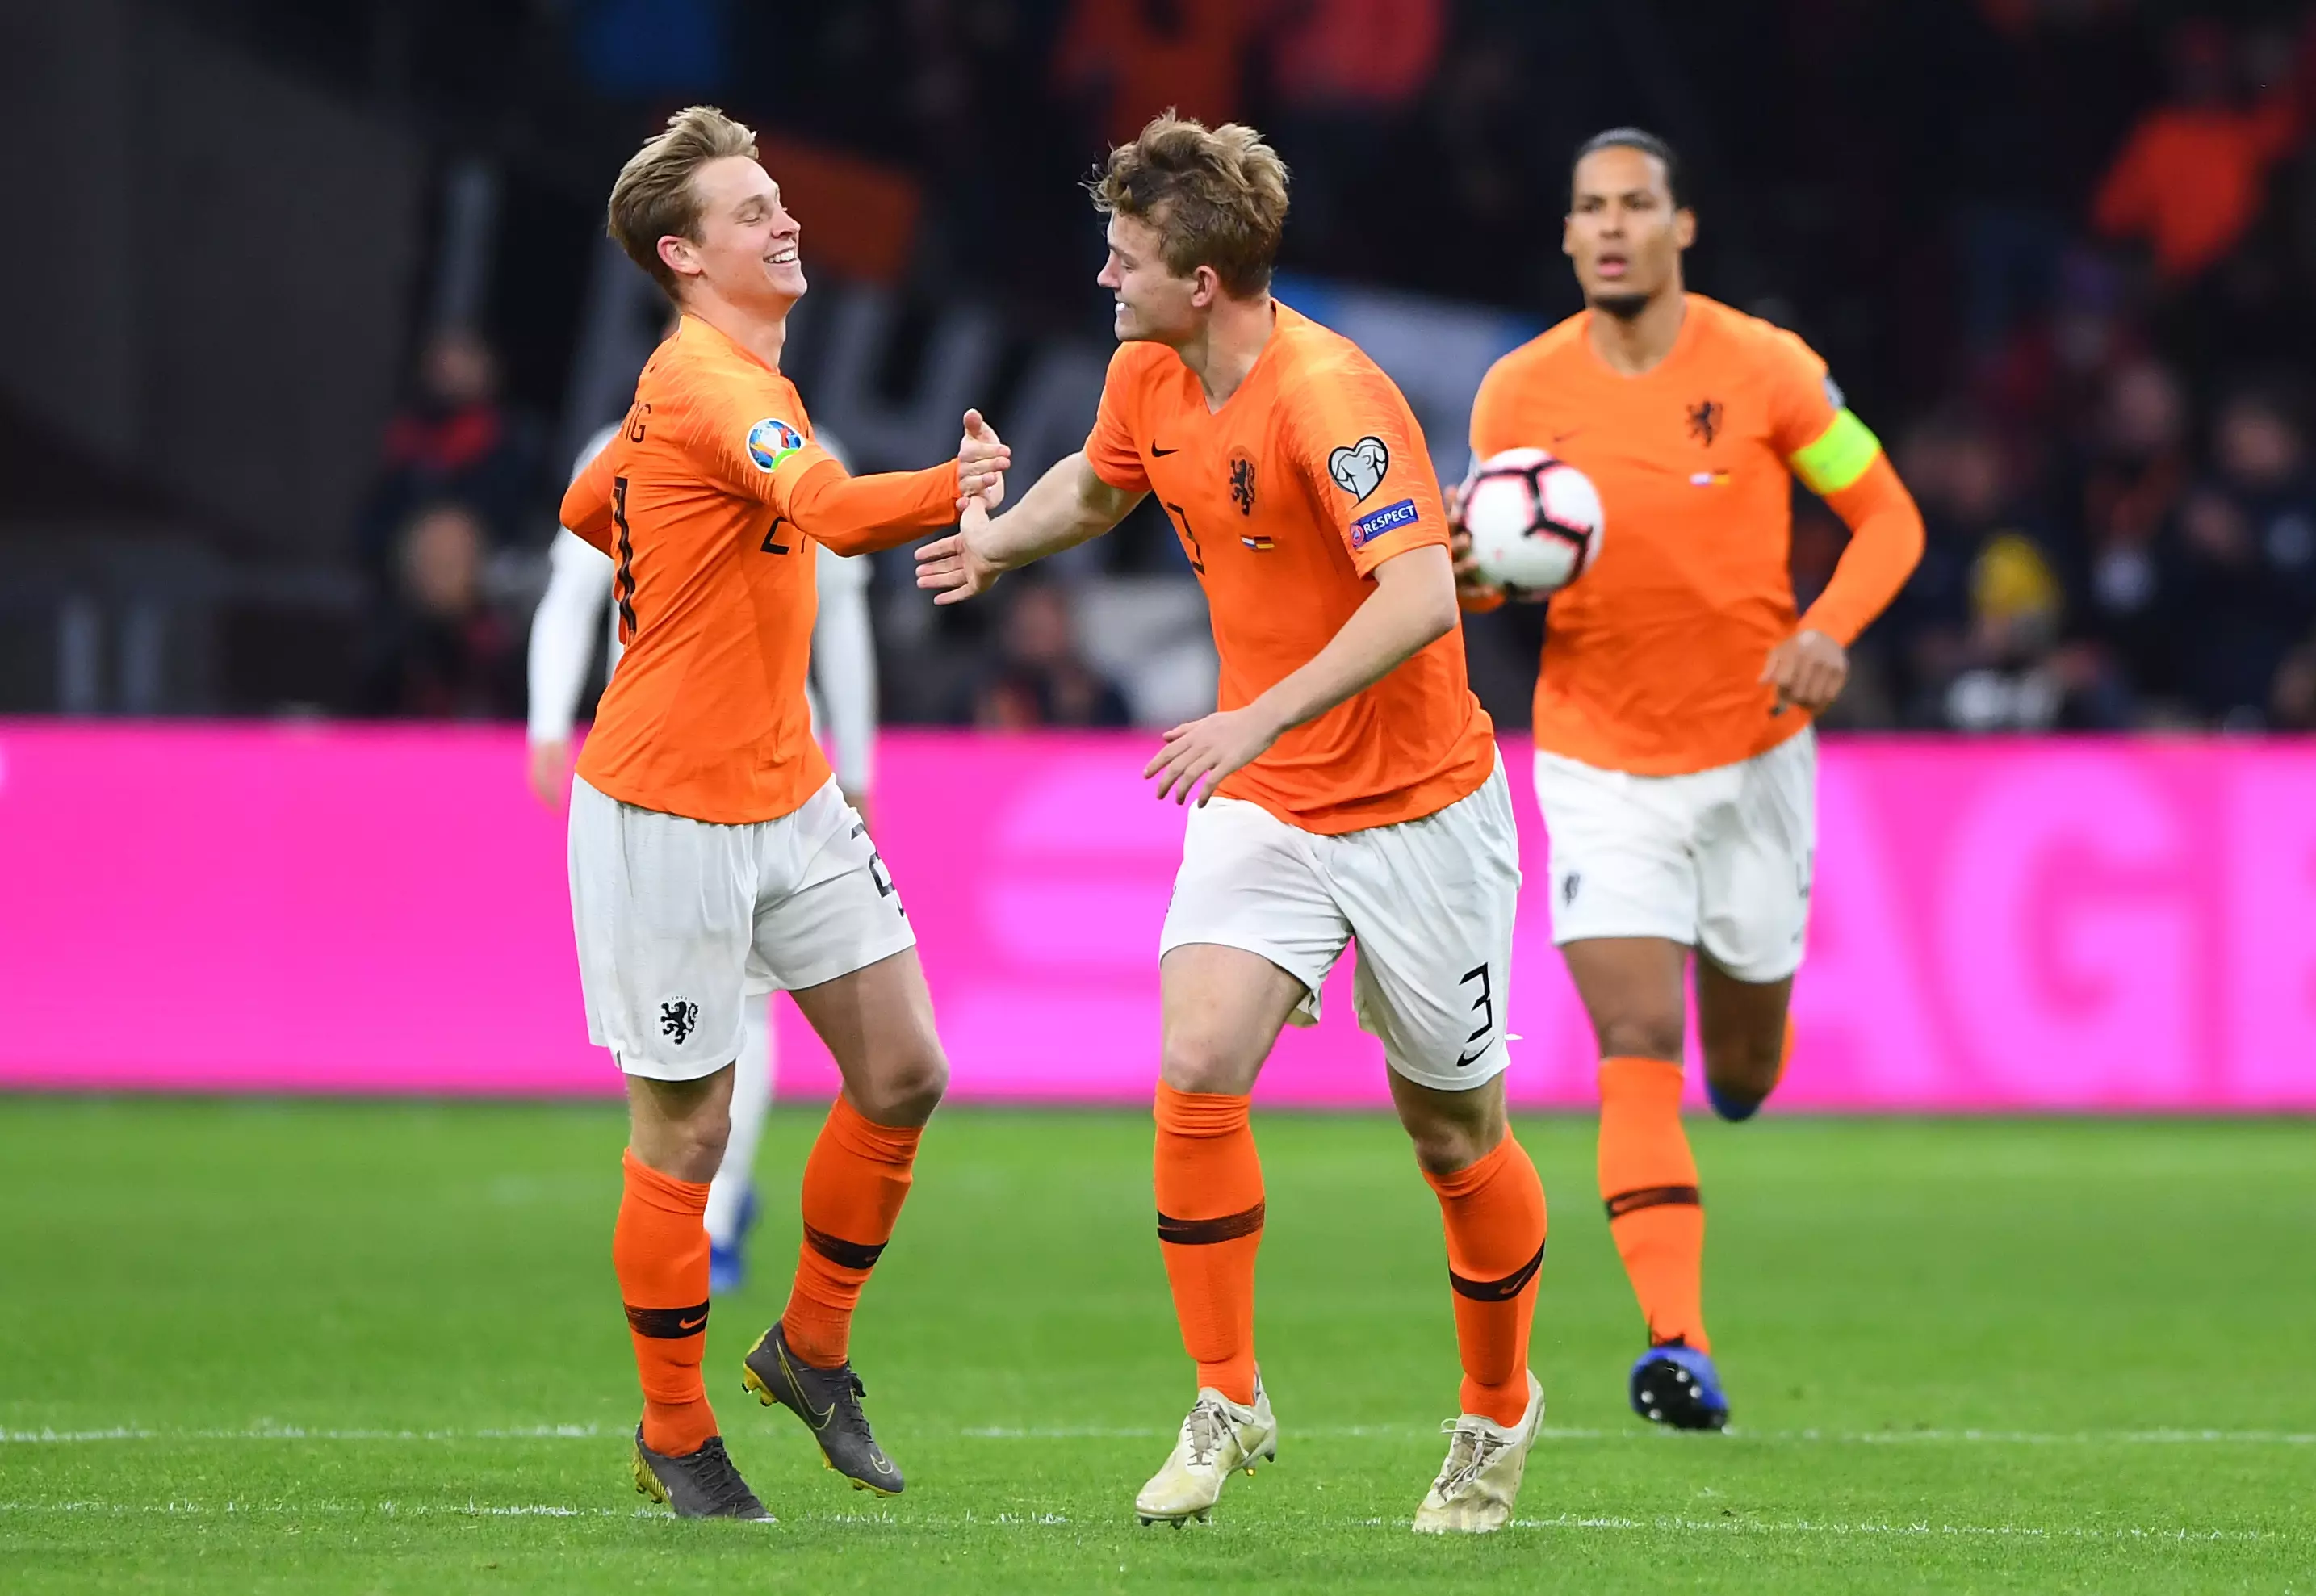 De Jong and De Ligt could be together for a long time. Image: PA Images